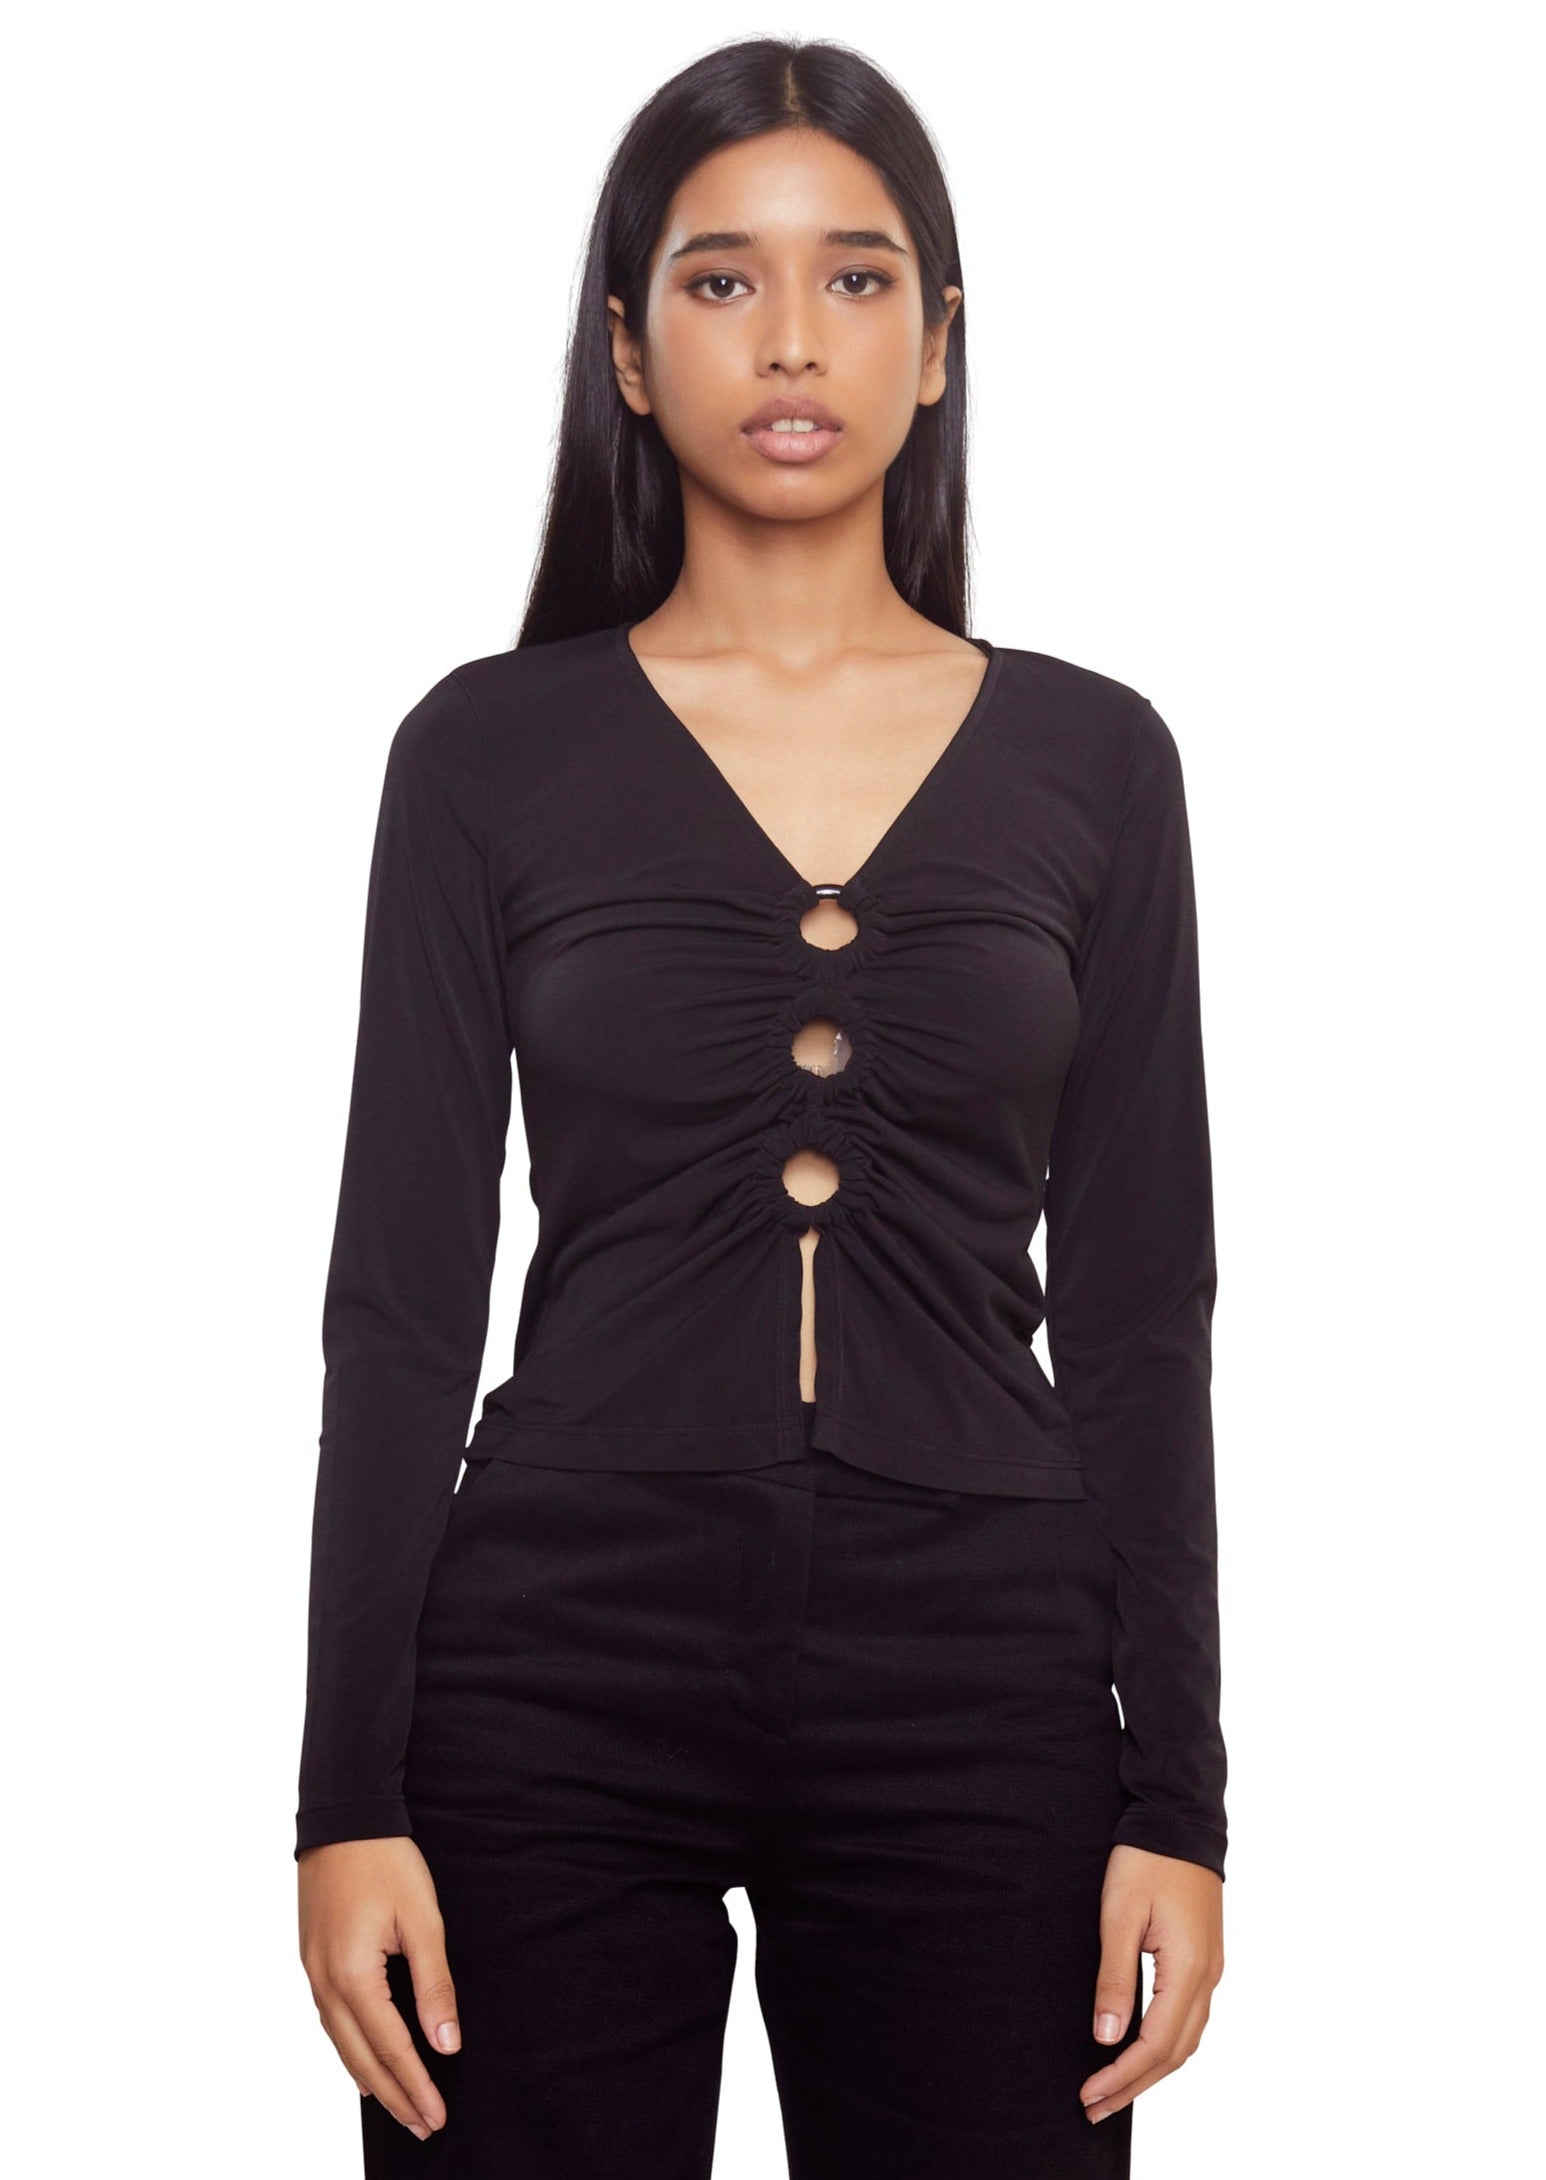 Black long sleeves v neck top with three rings from the brand Musier